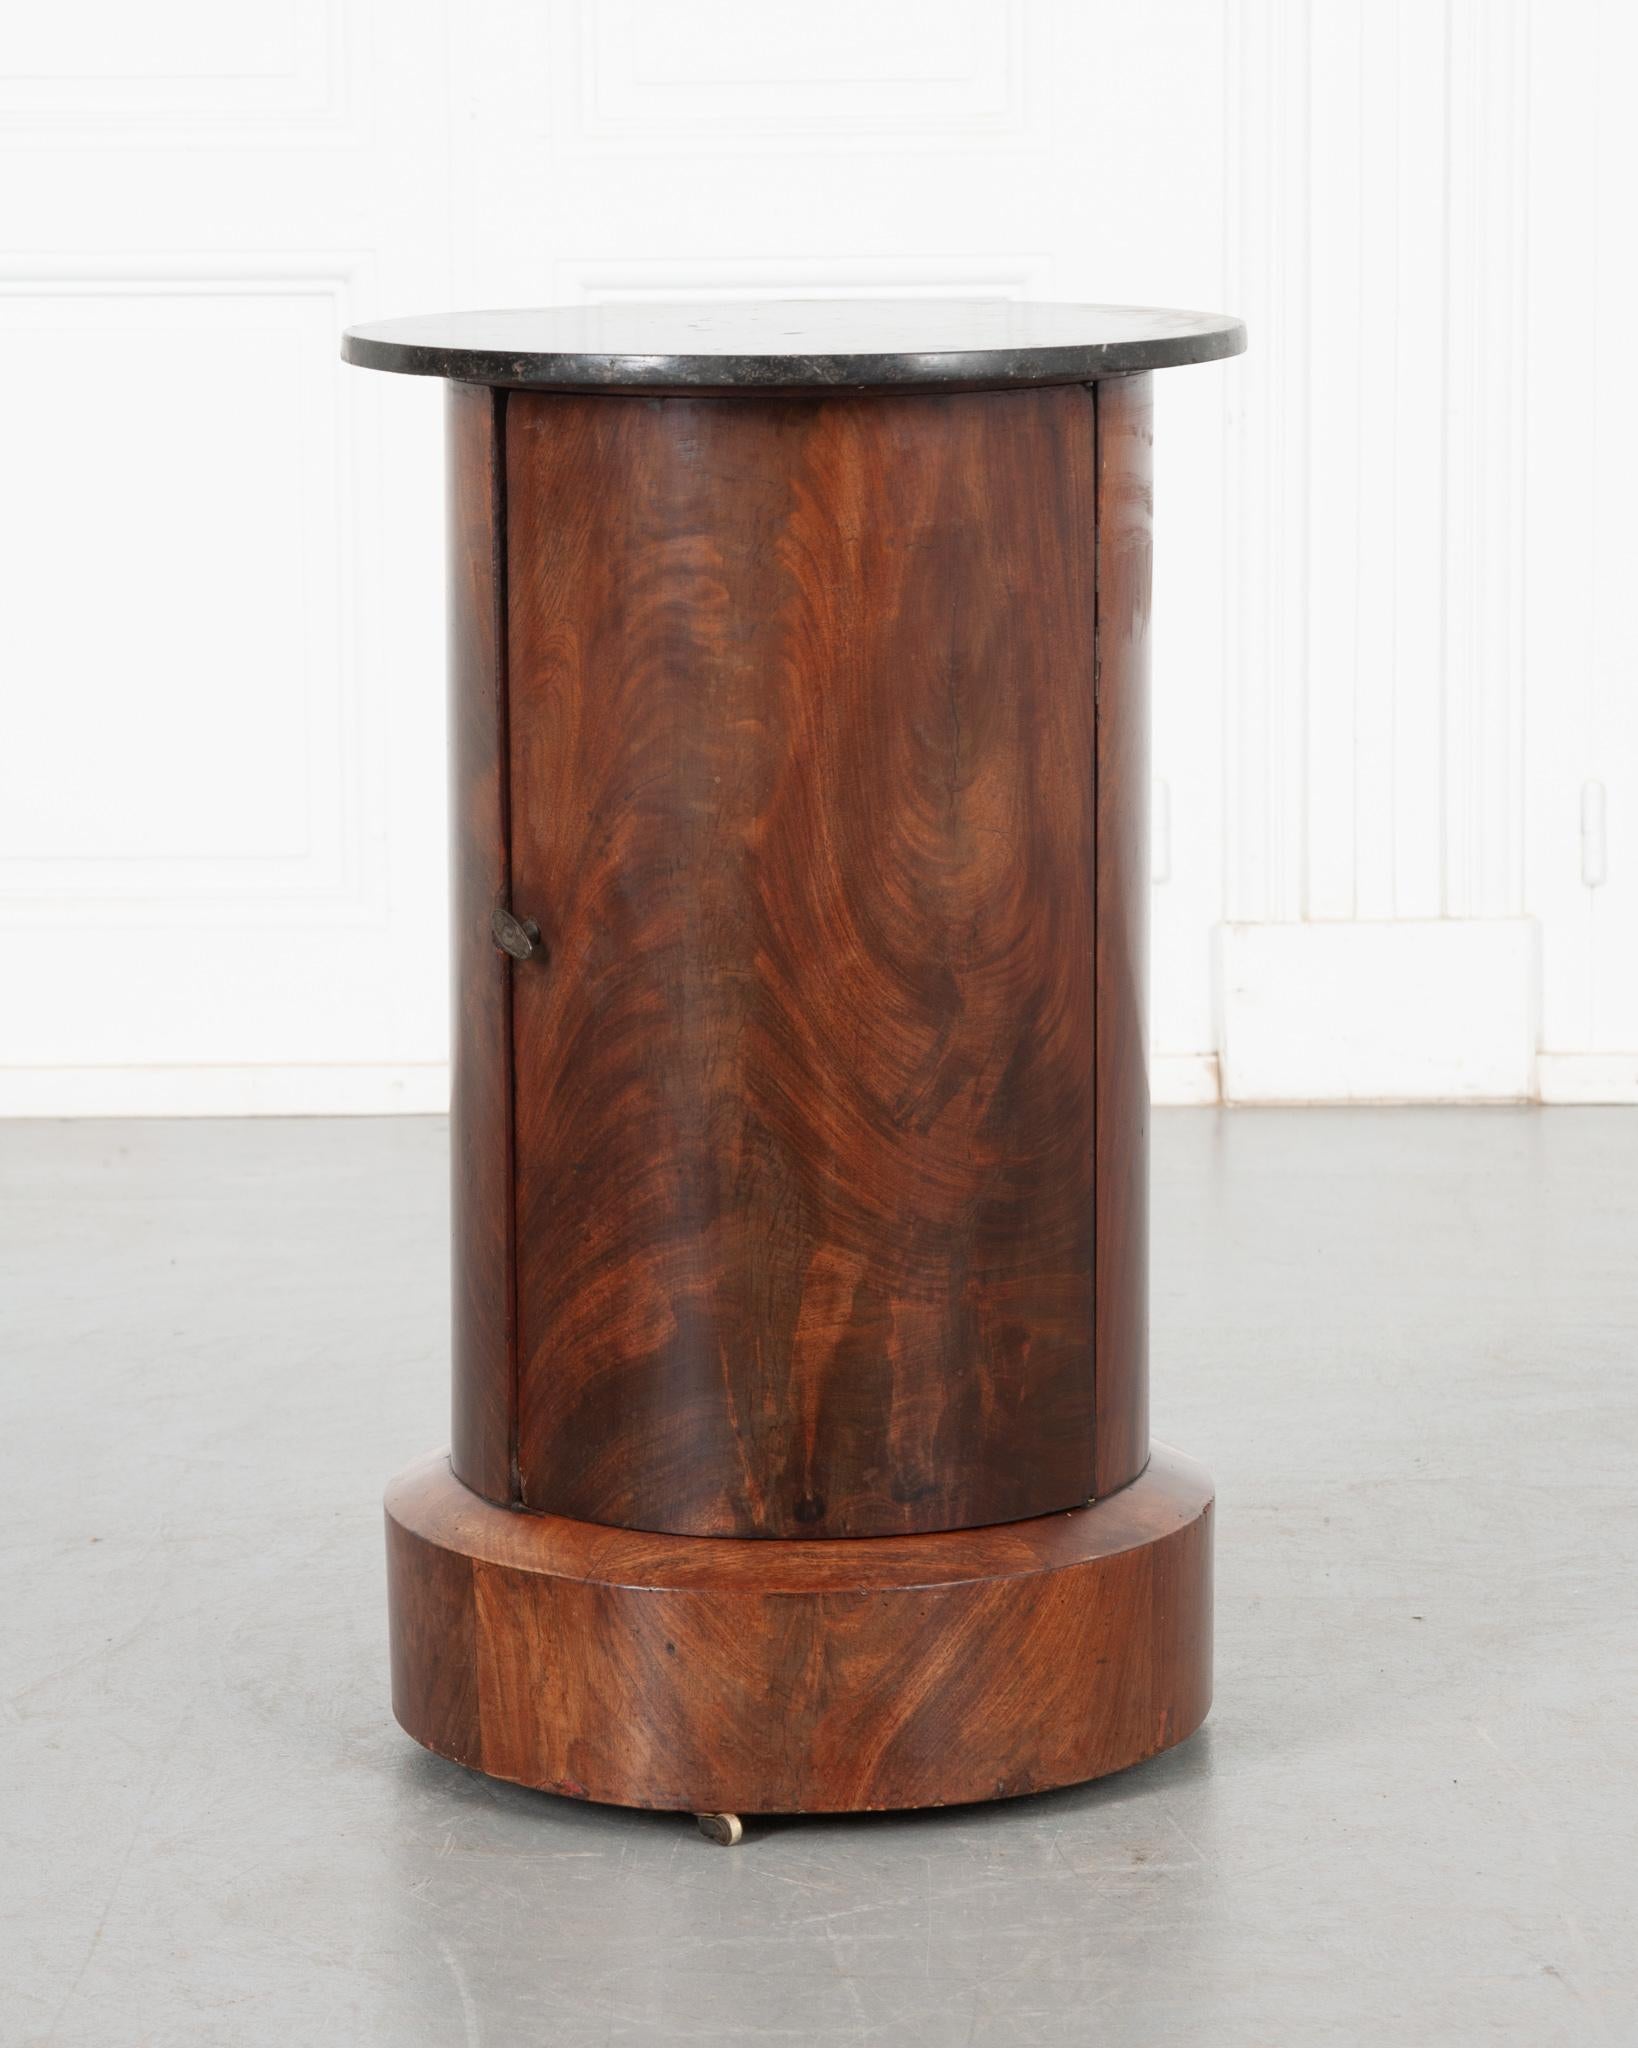 This round column-like piece was crafted in France, circa 1820’s. It has a beautiful fossil black granite top over a solid mahogany body. The door features a neat metal pull that secures the door closed. The interior houses two shelves; one with a